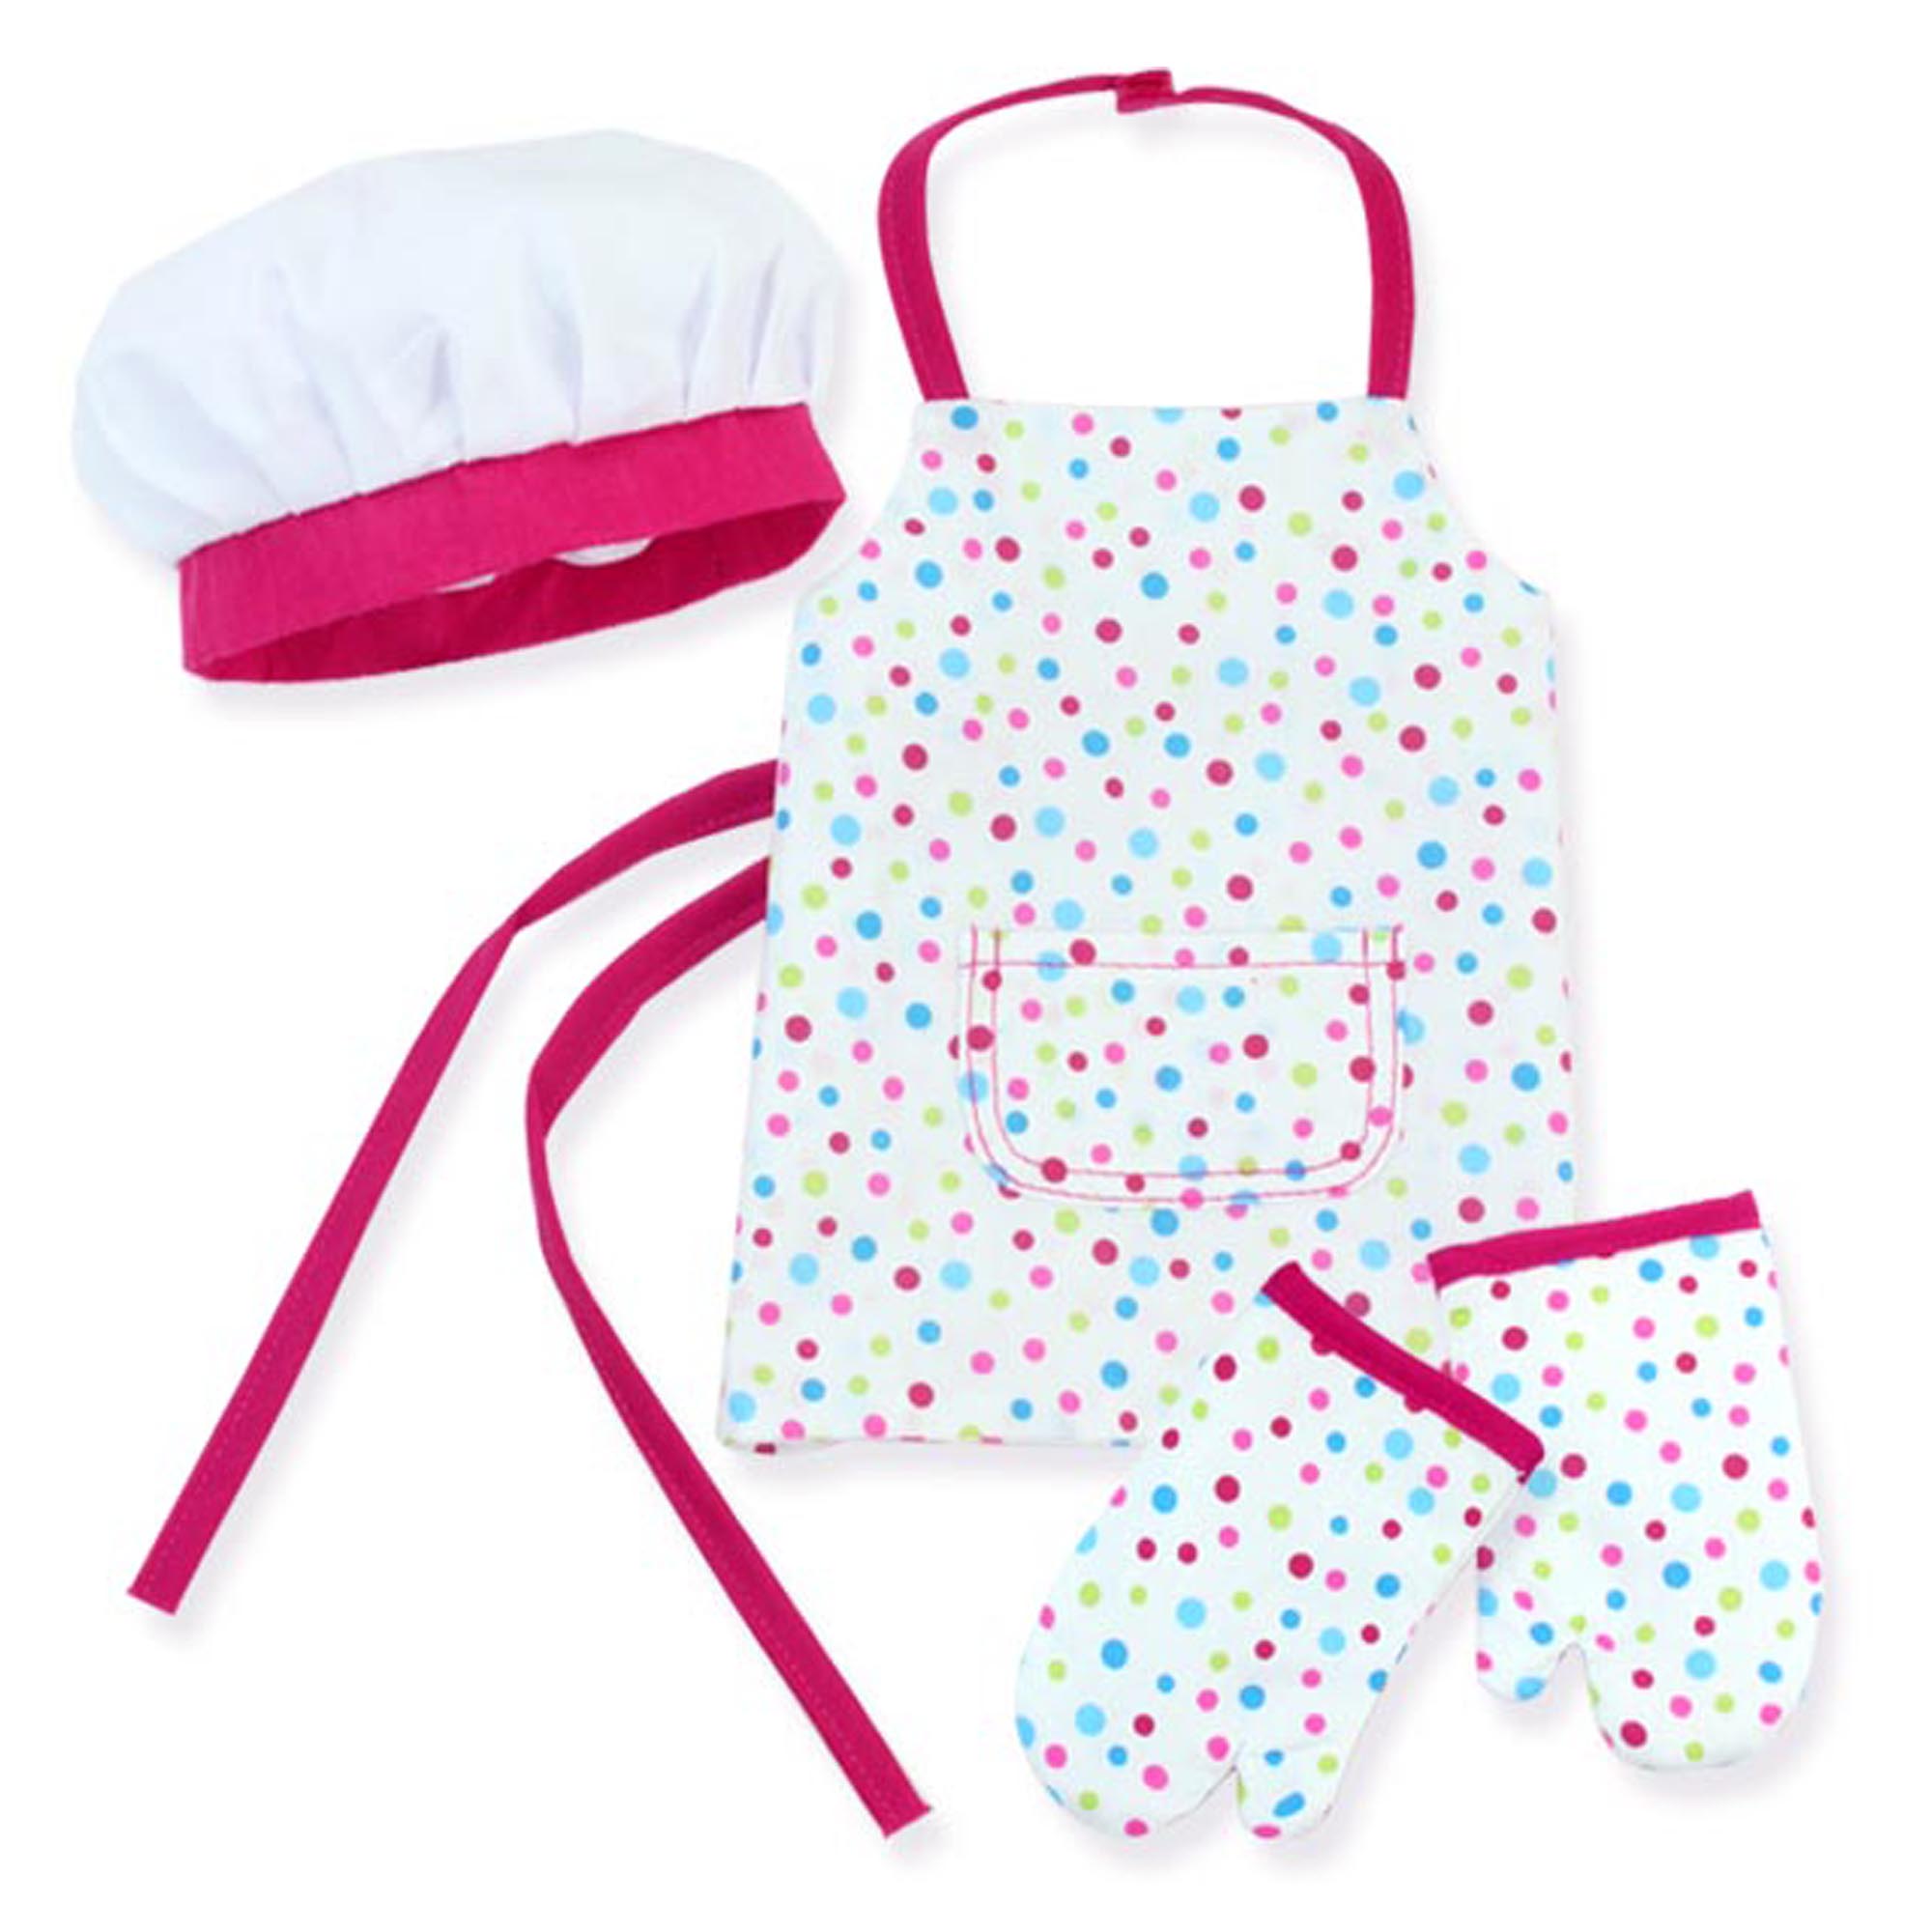 Sophia's Baking Apron, White Hat and Oven Mitts Set for 18'' Dolls, White